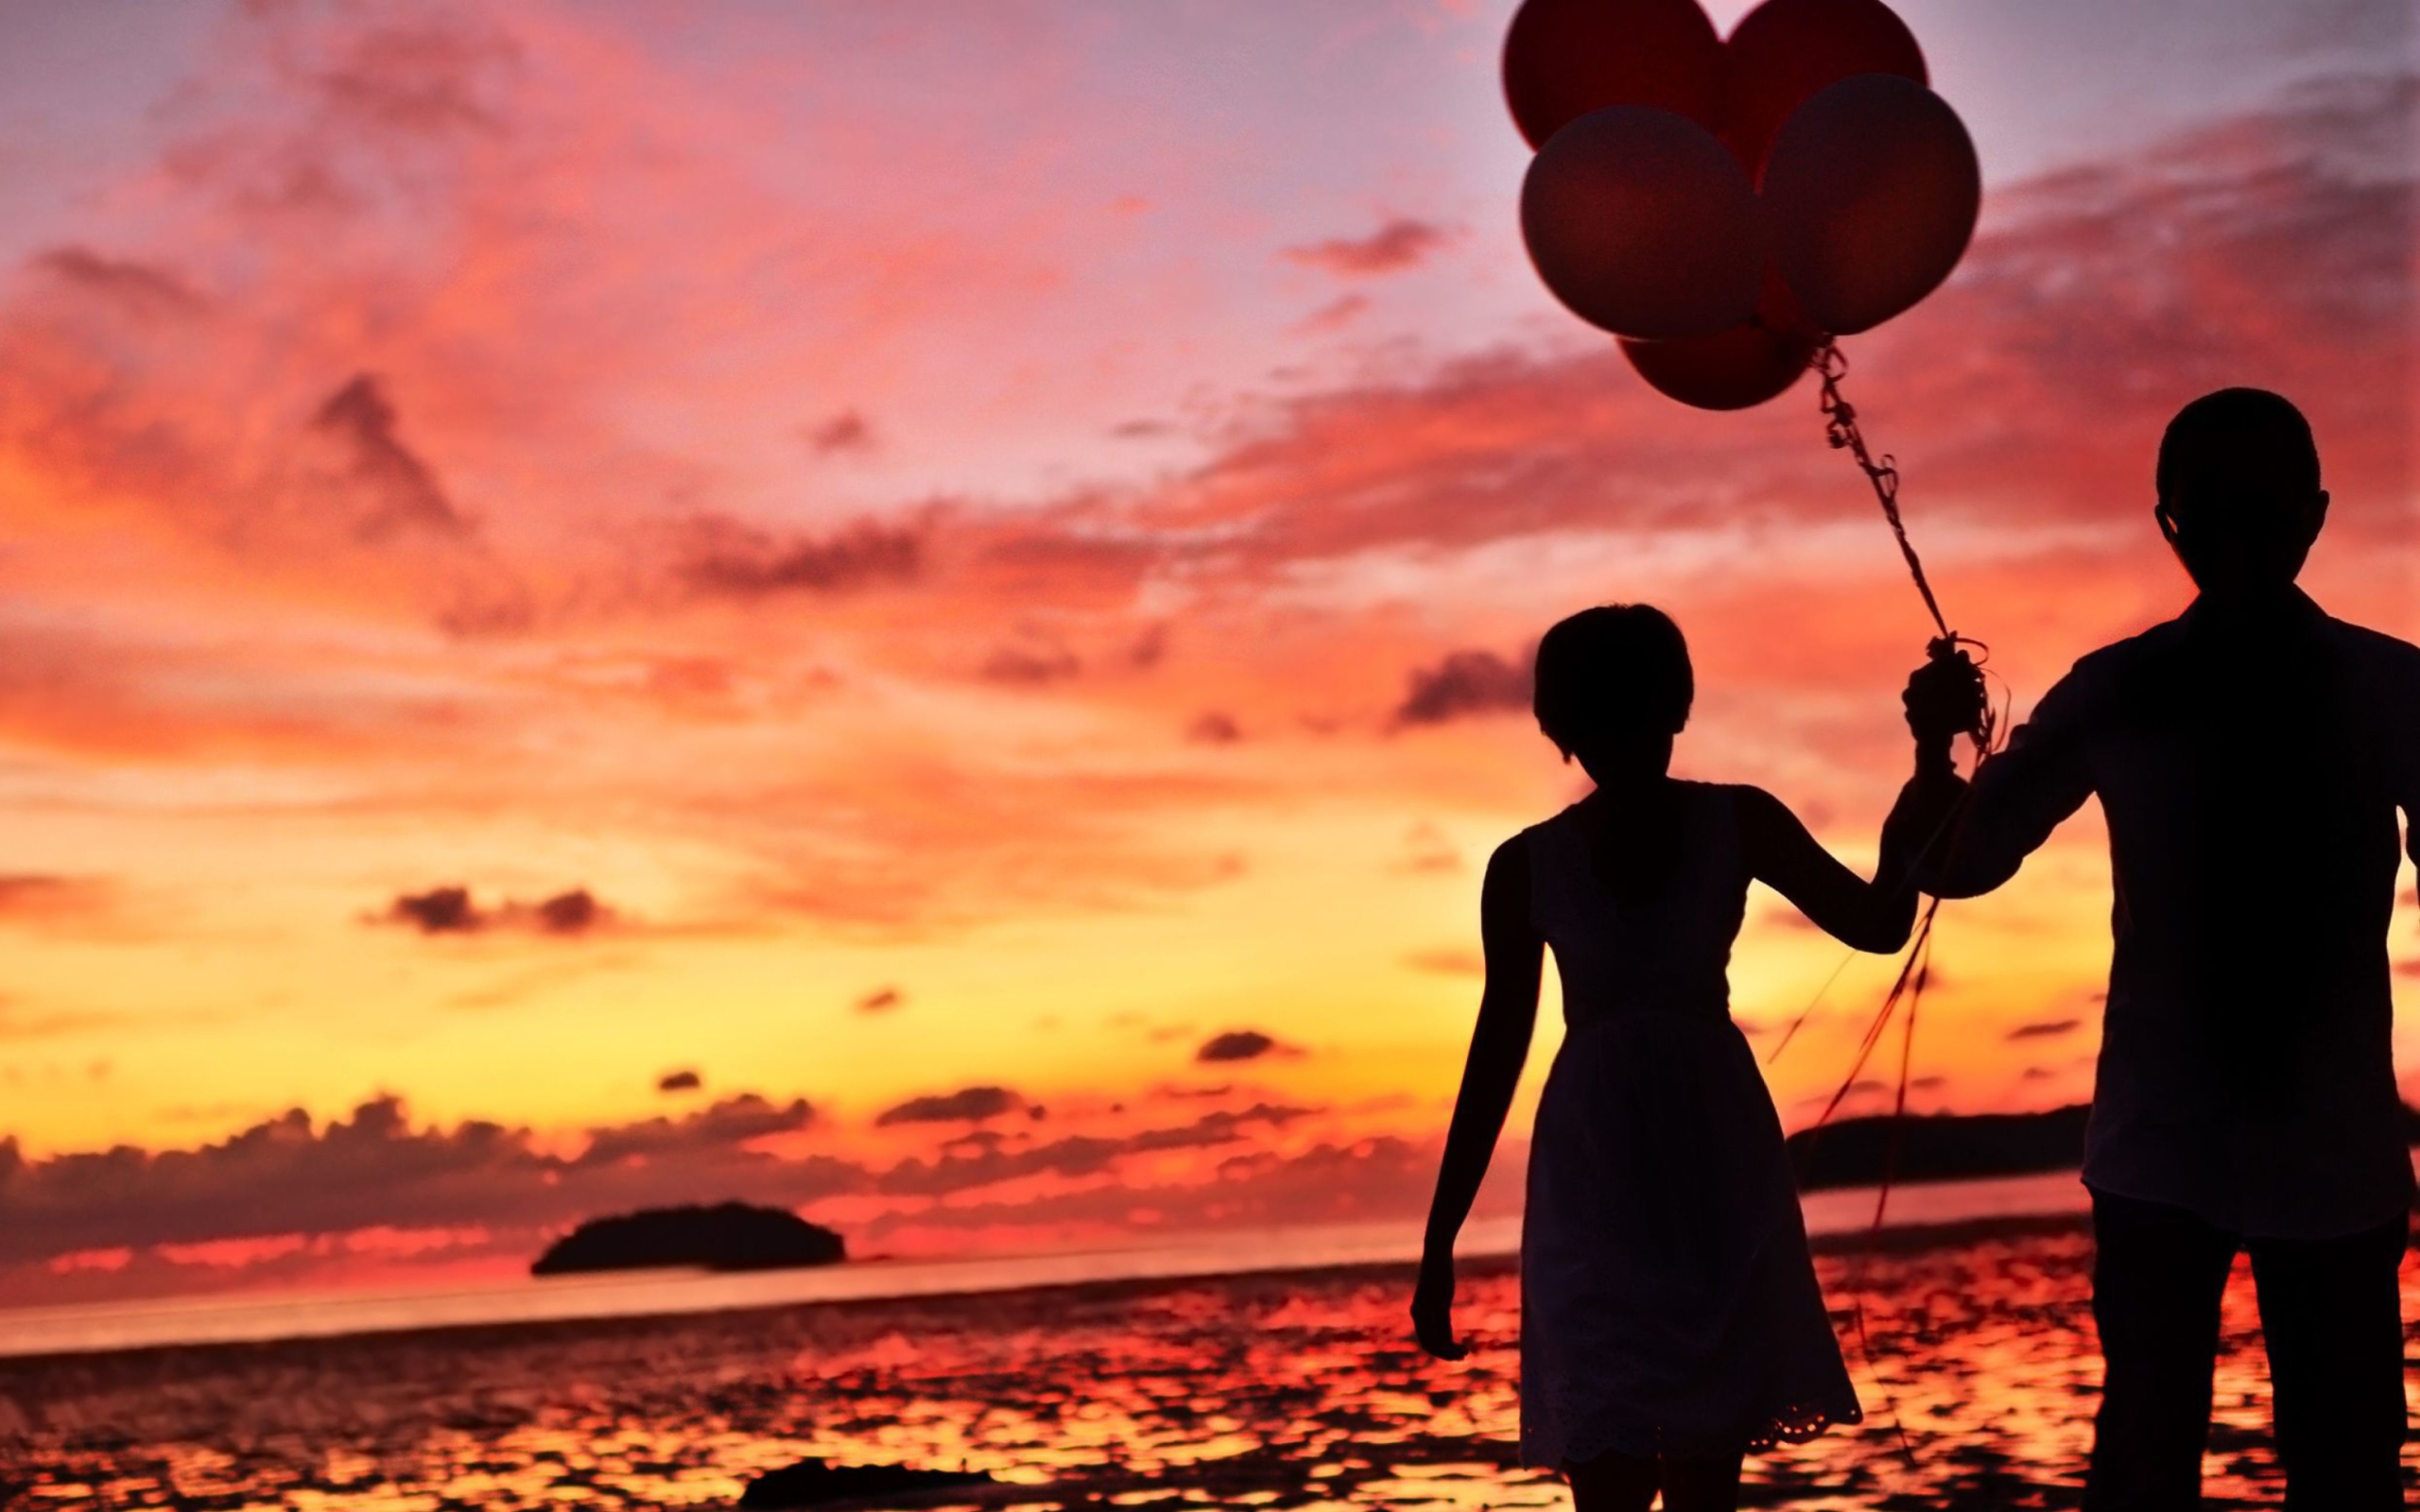 Обои Couple With Balloons Silhouette At Sunset 2560x1600